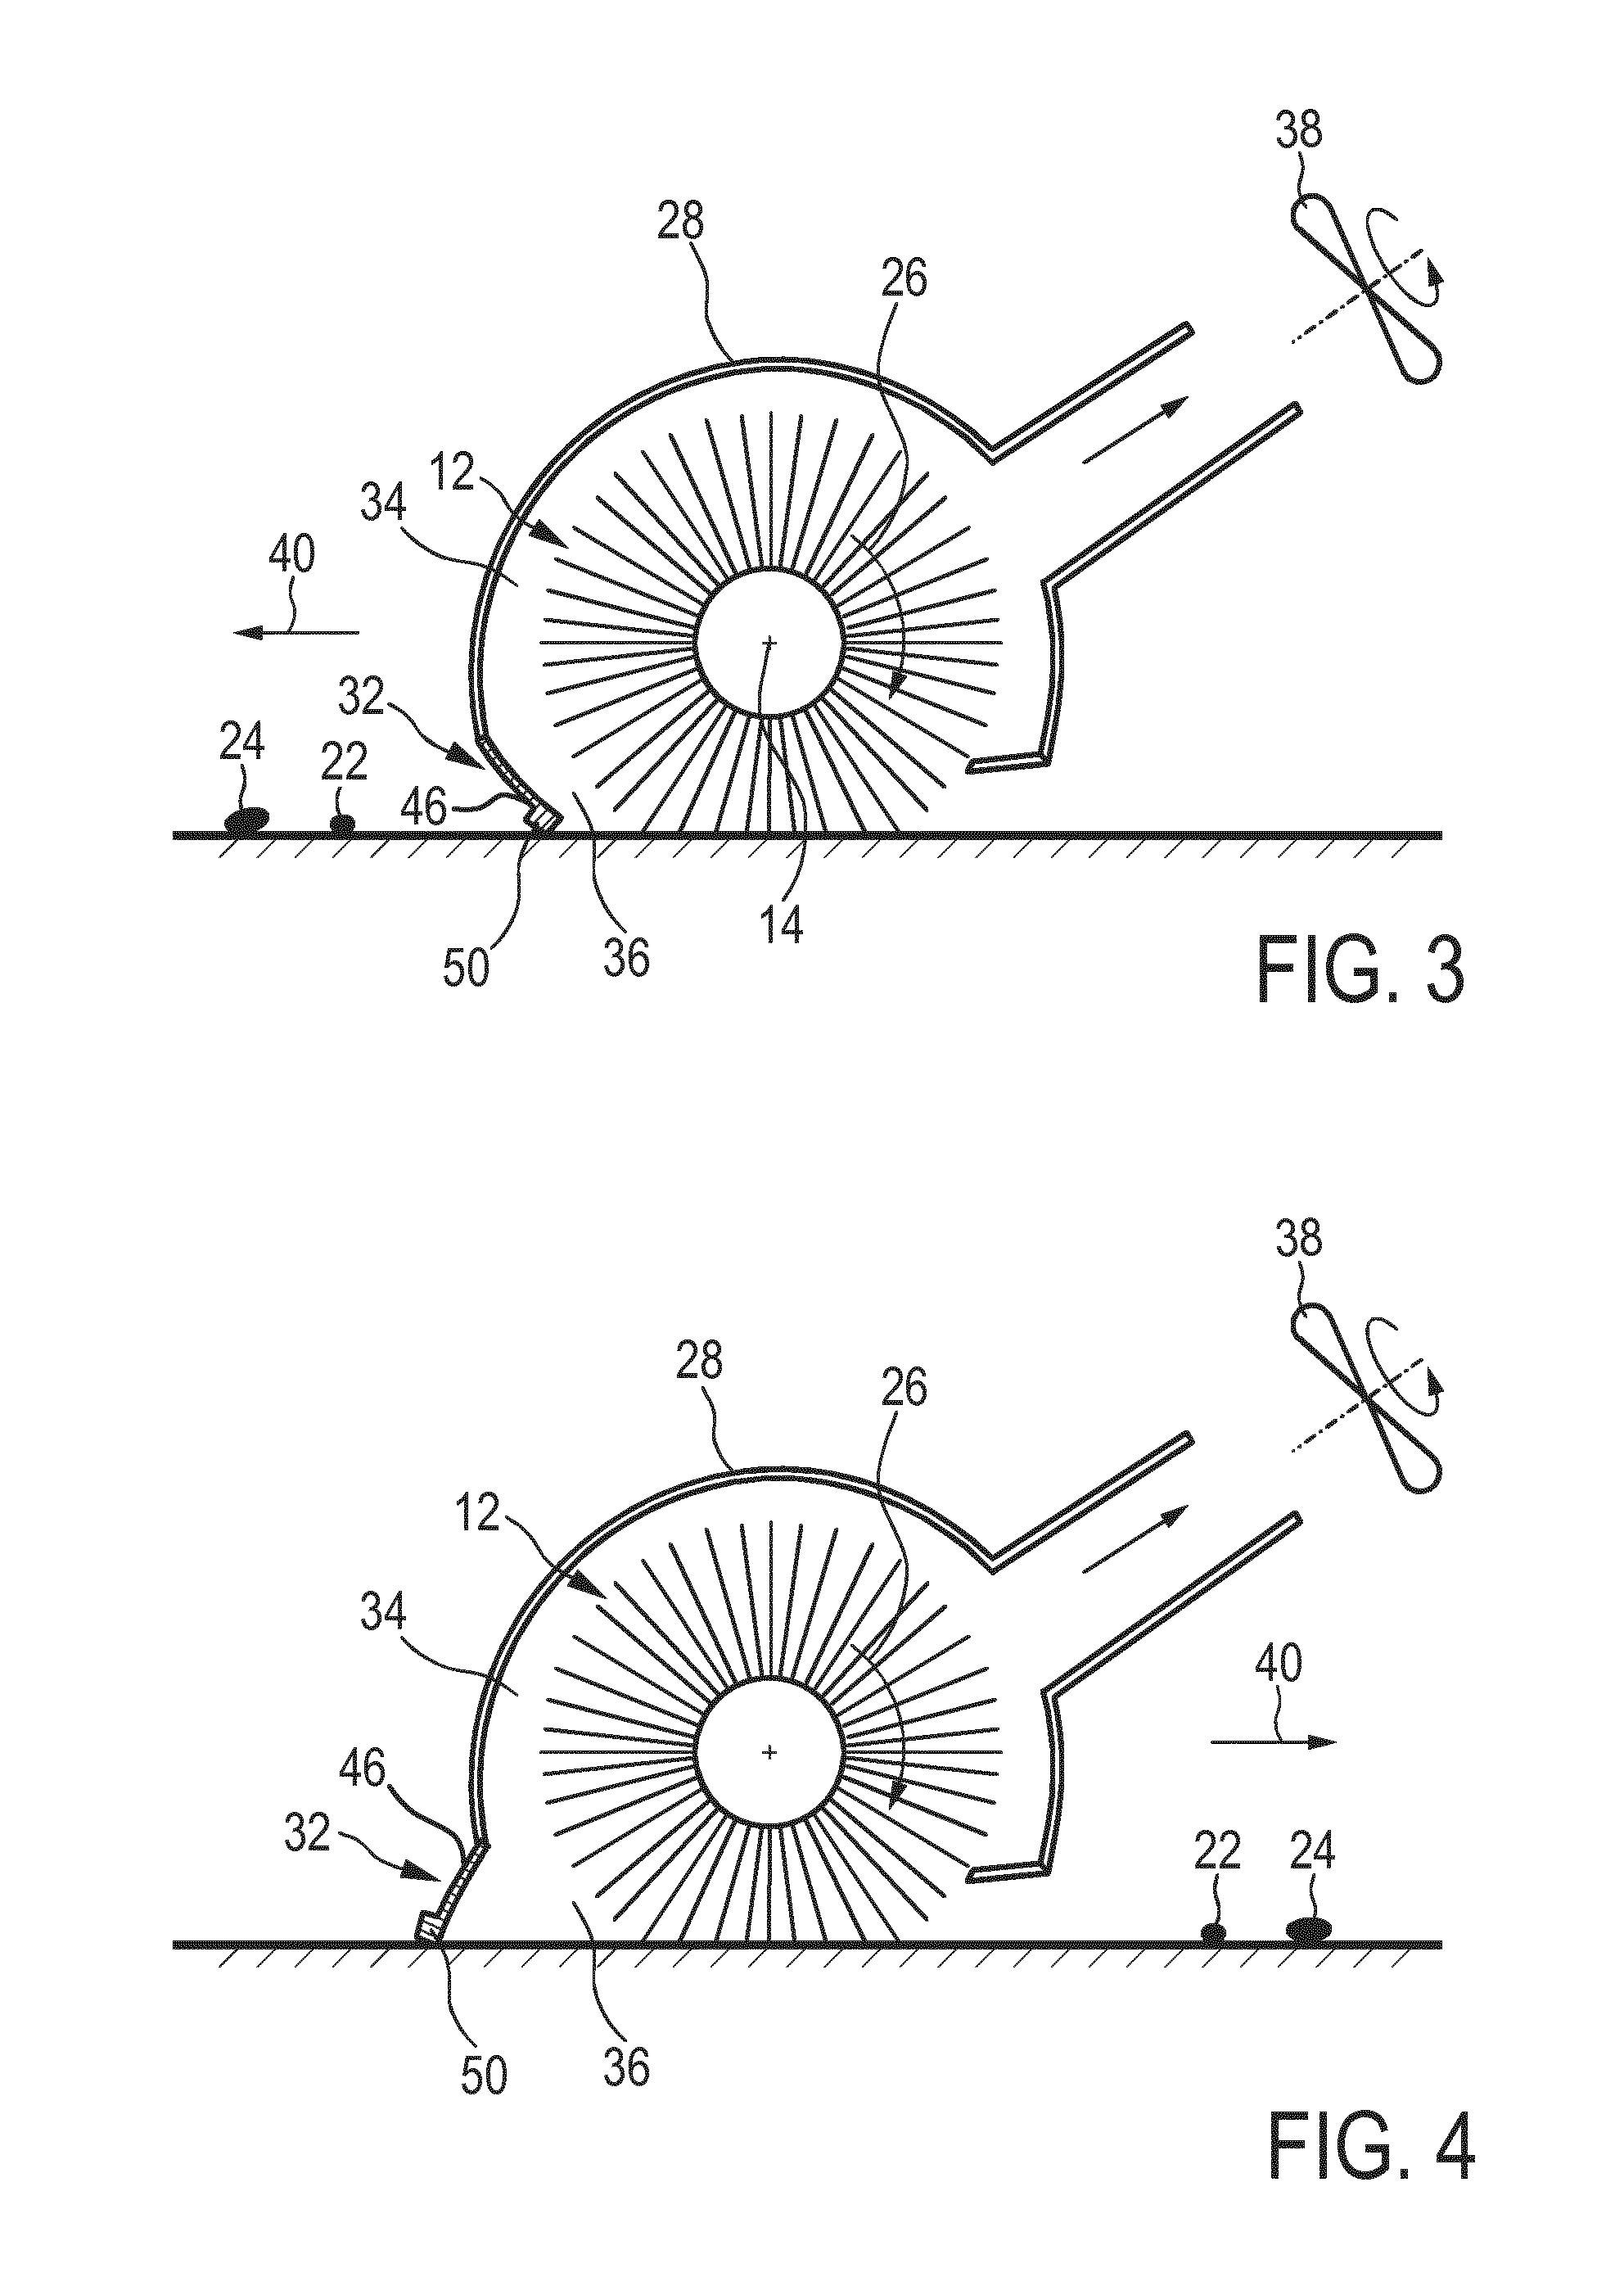 Nozzle arrangement with brush and squeegee